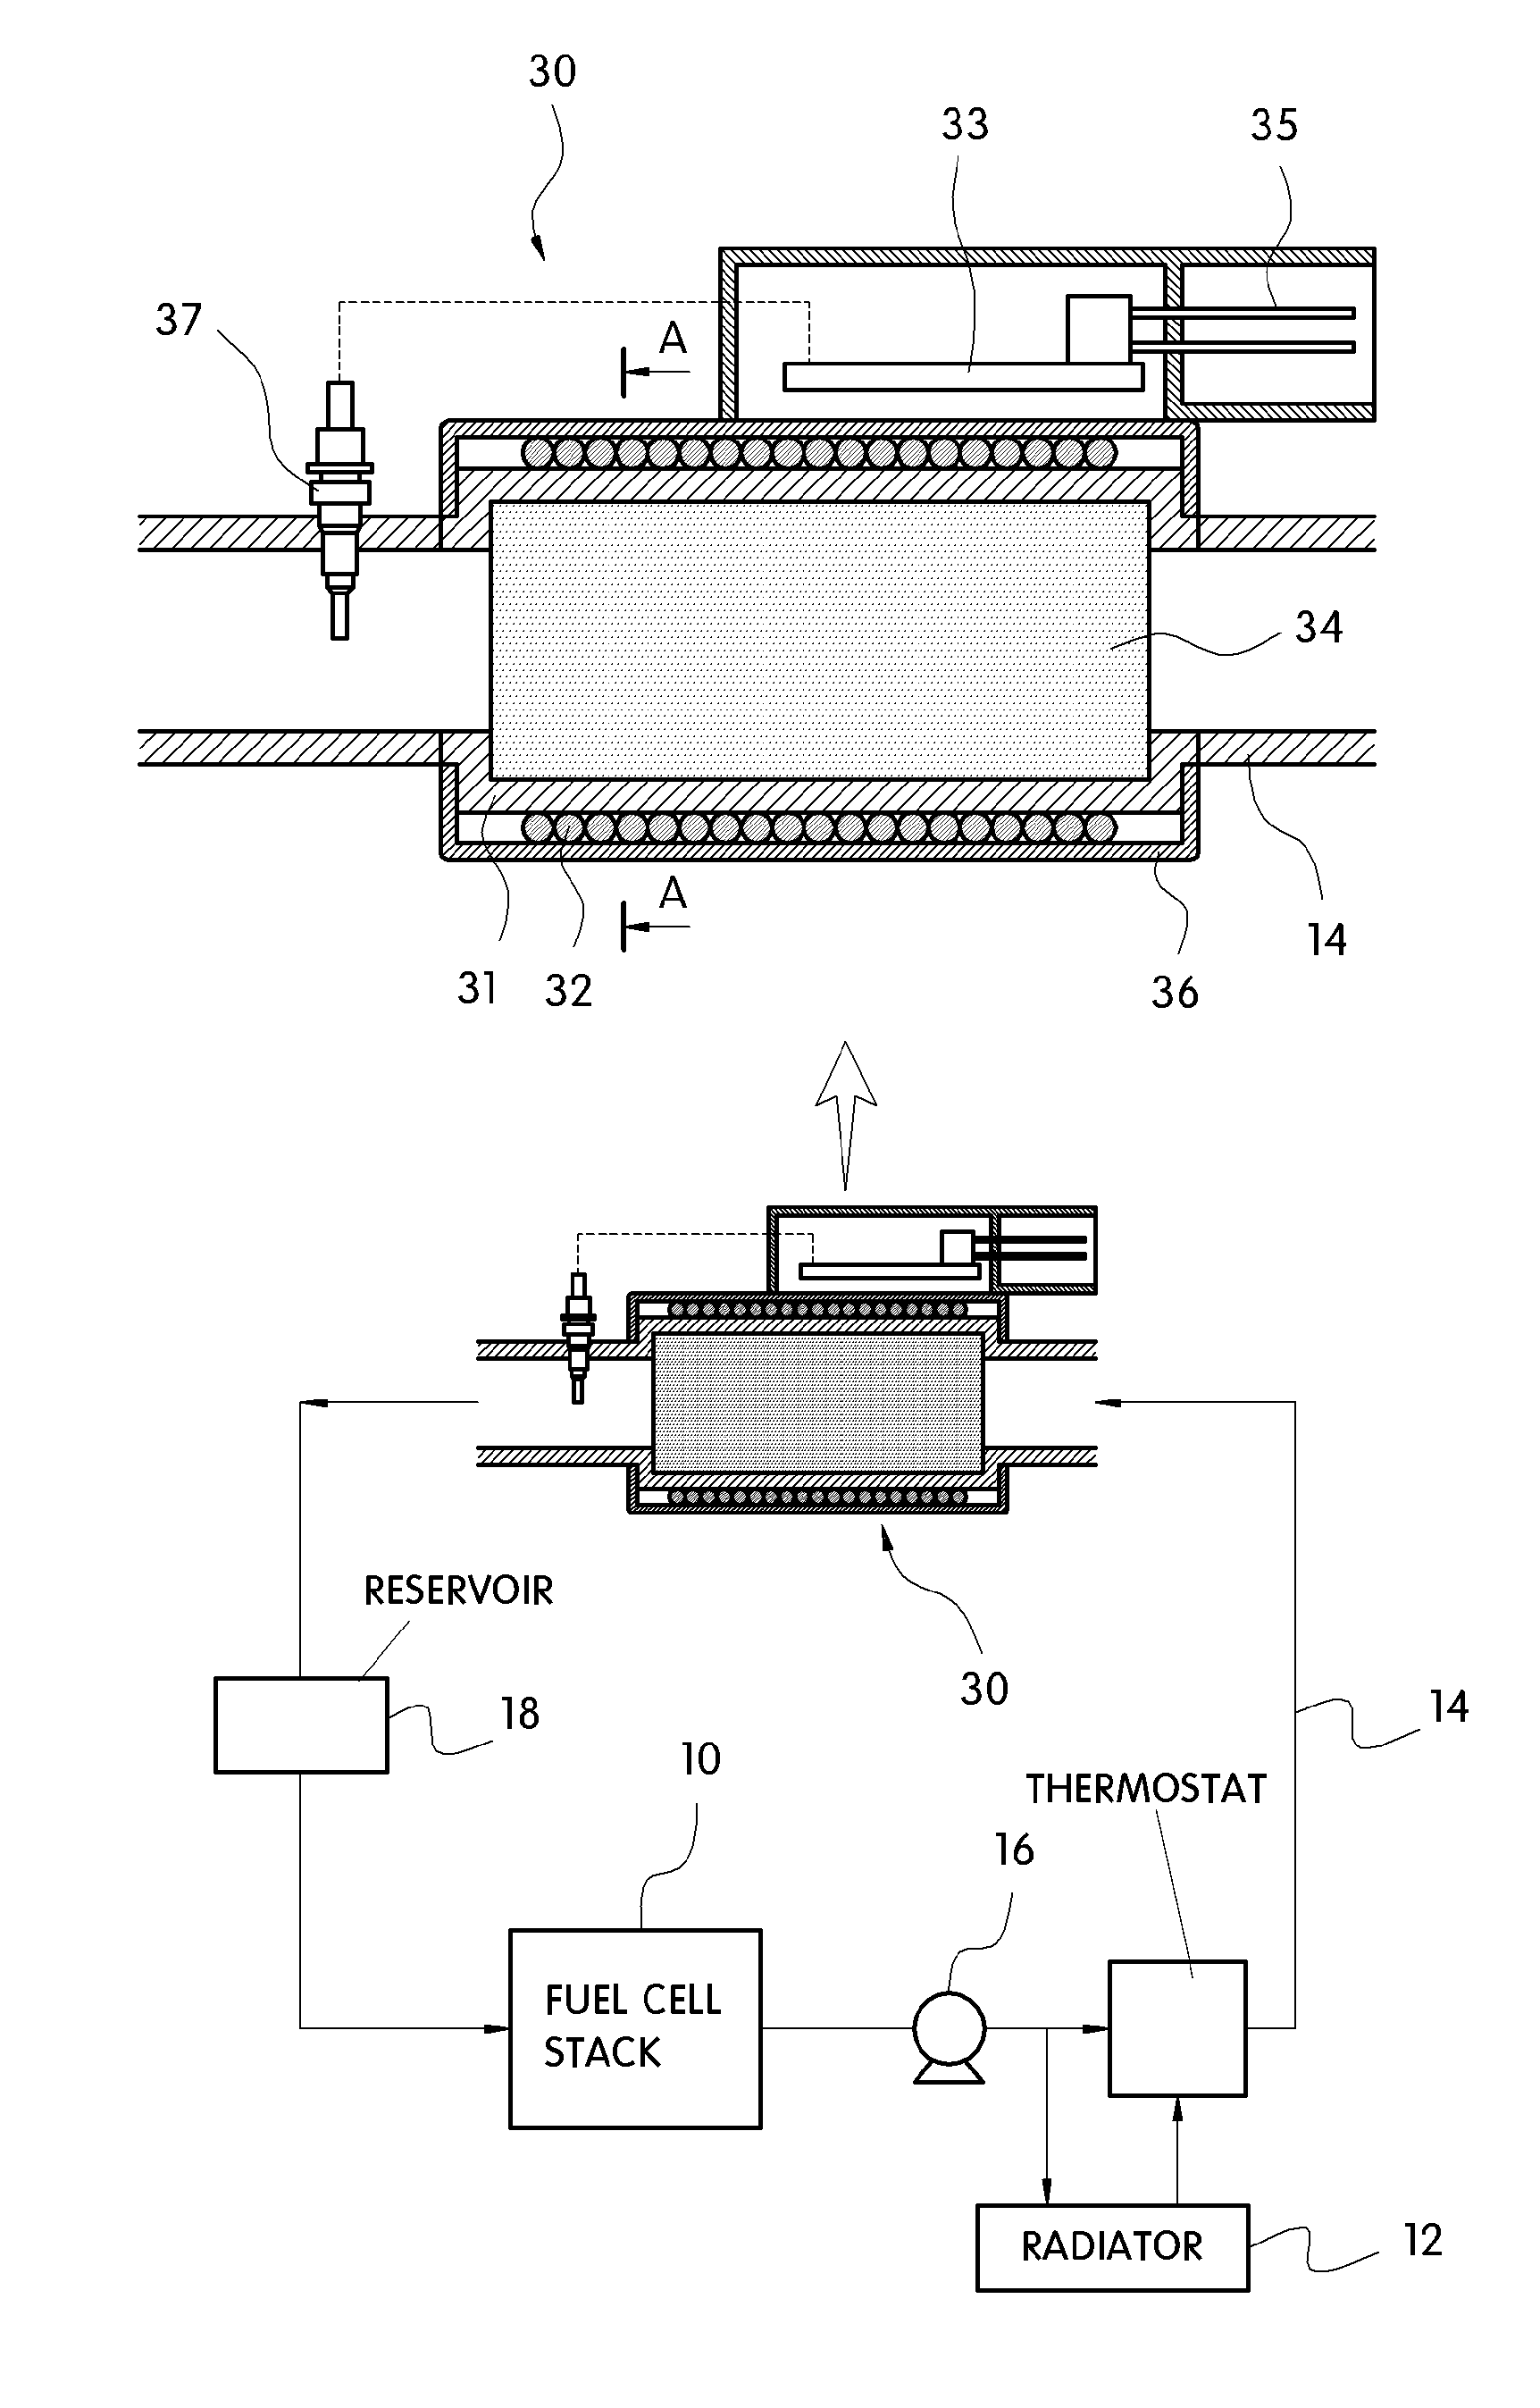 Induction heating device for fuel cell system